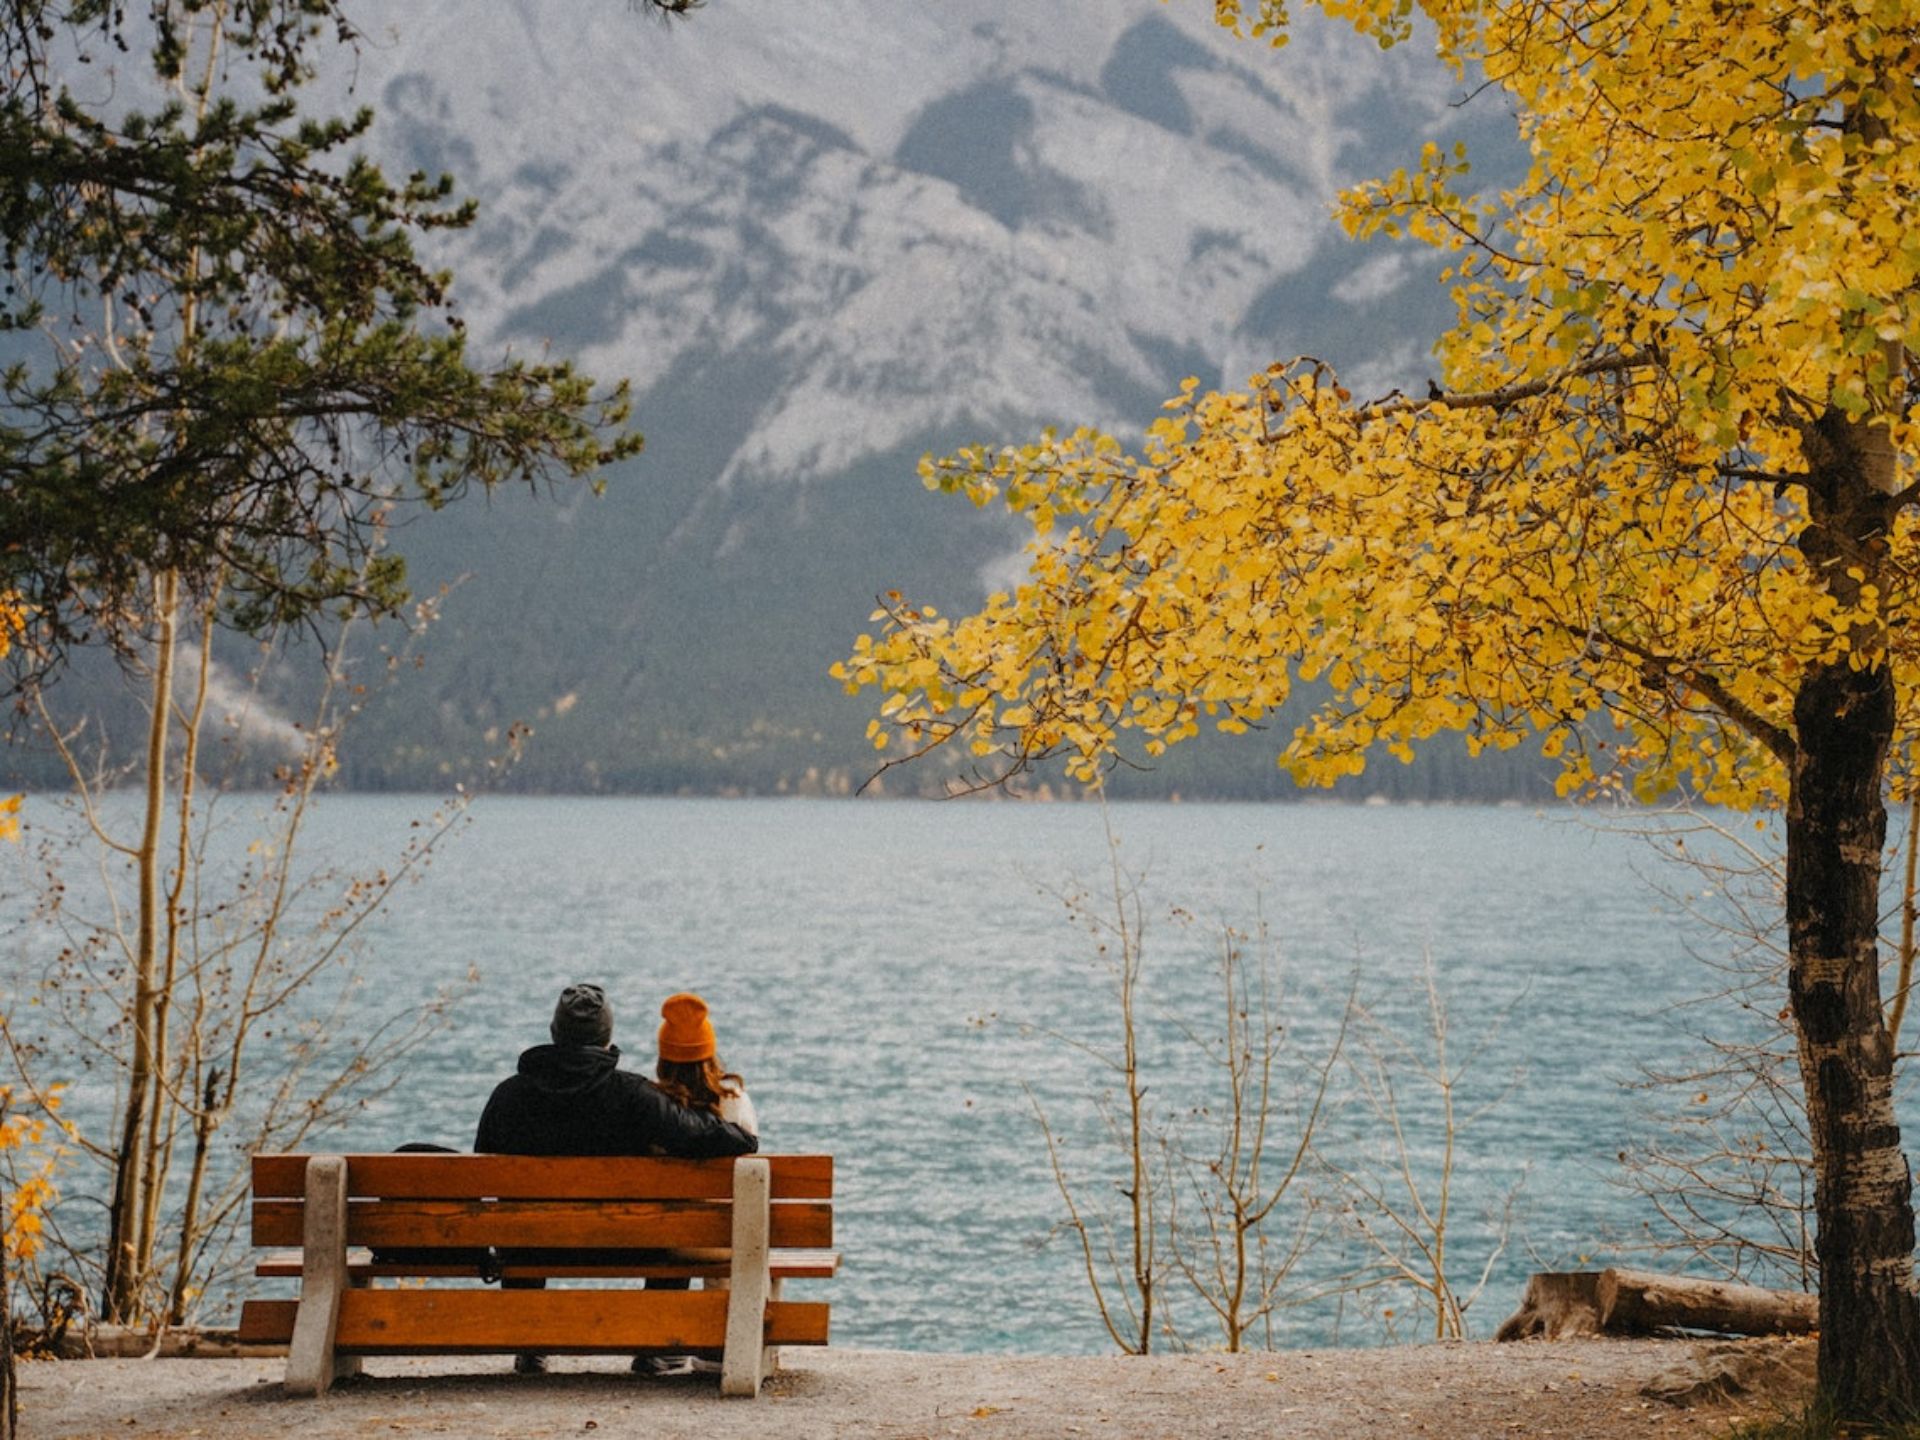 A couple sitting by the lake.